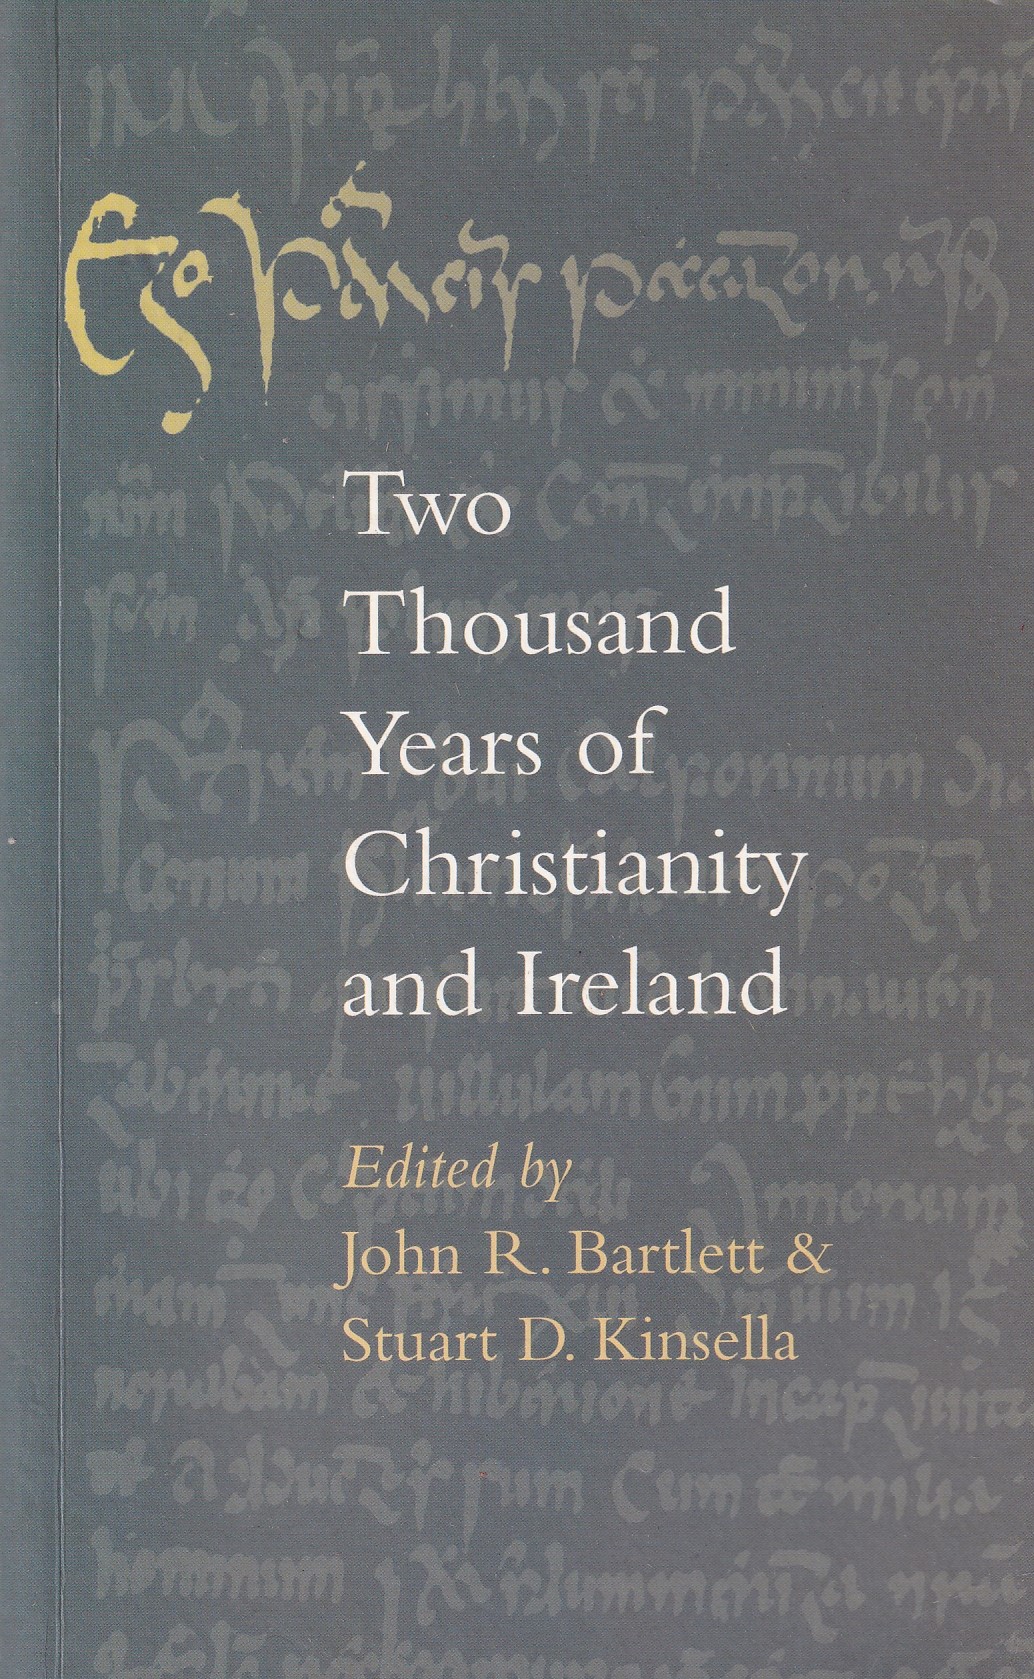 Two Thousand Years of Christianity and Ireland by John R. Bartlett & Stuart D. Kinsella (eds.)